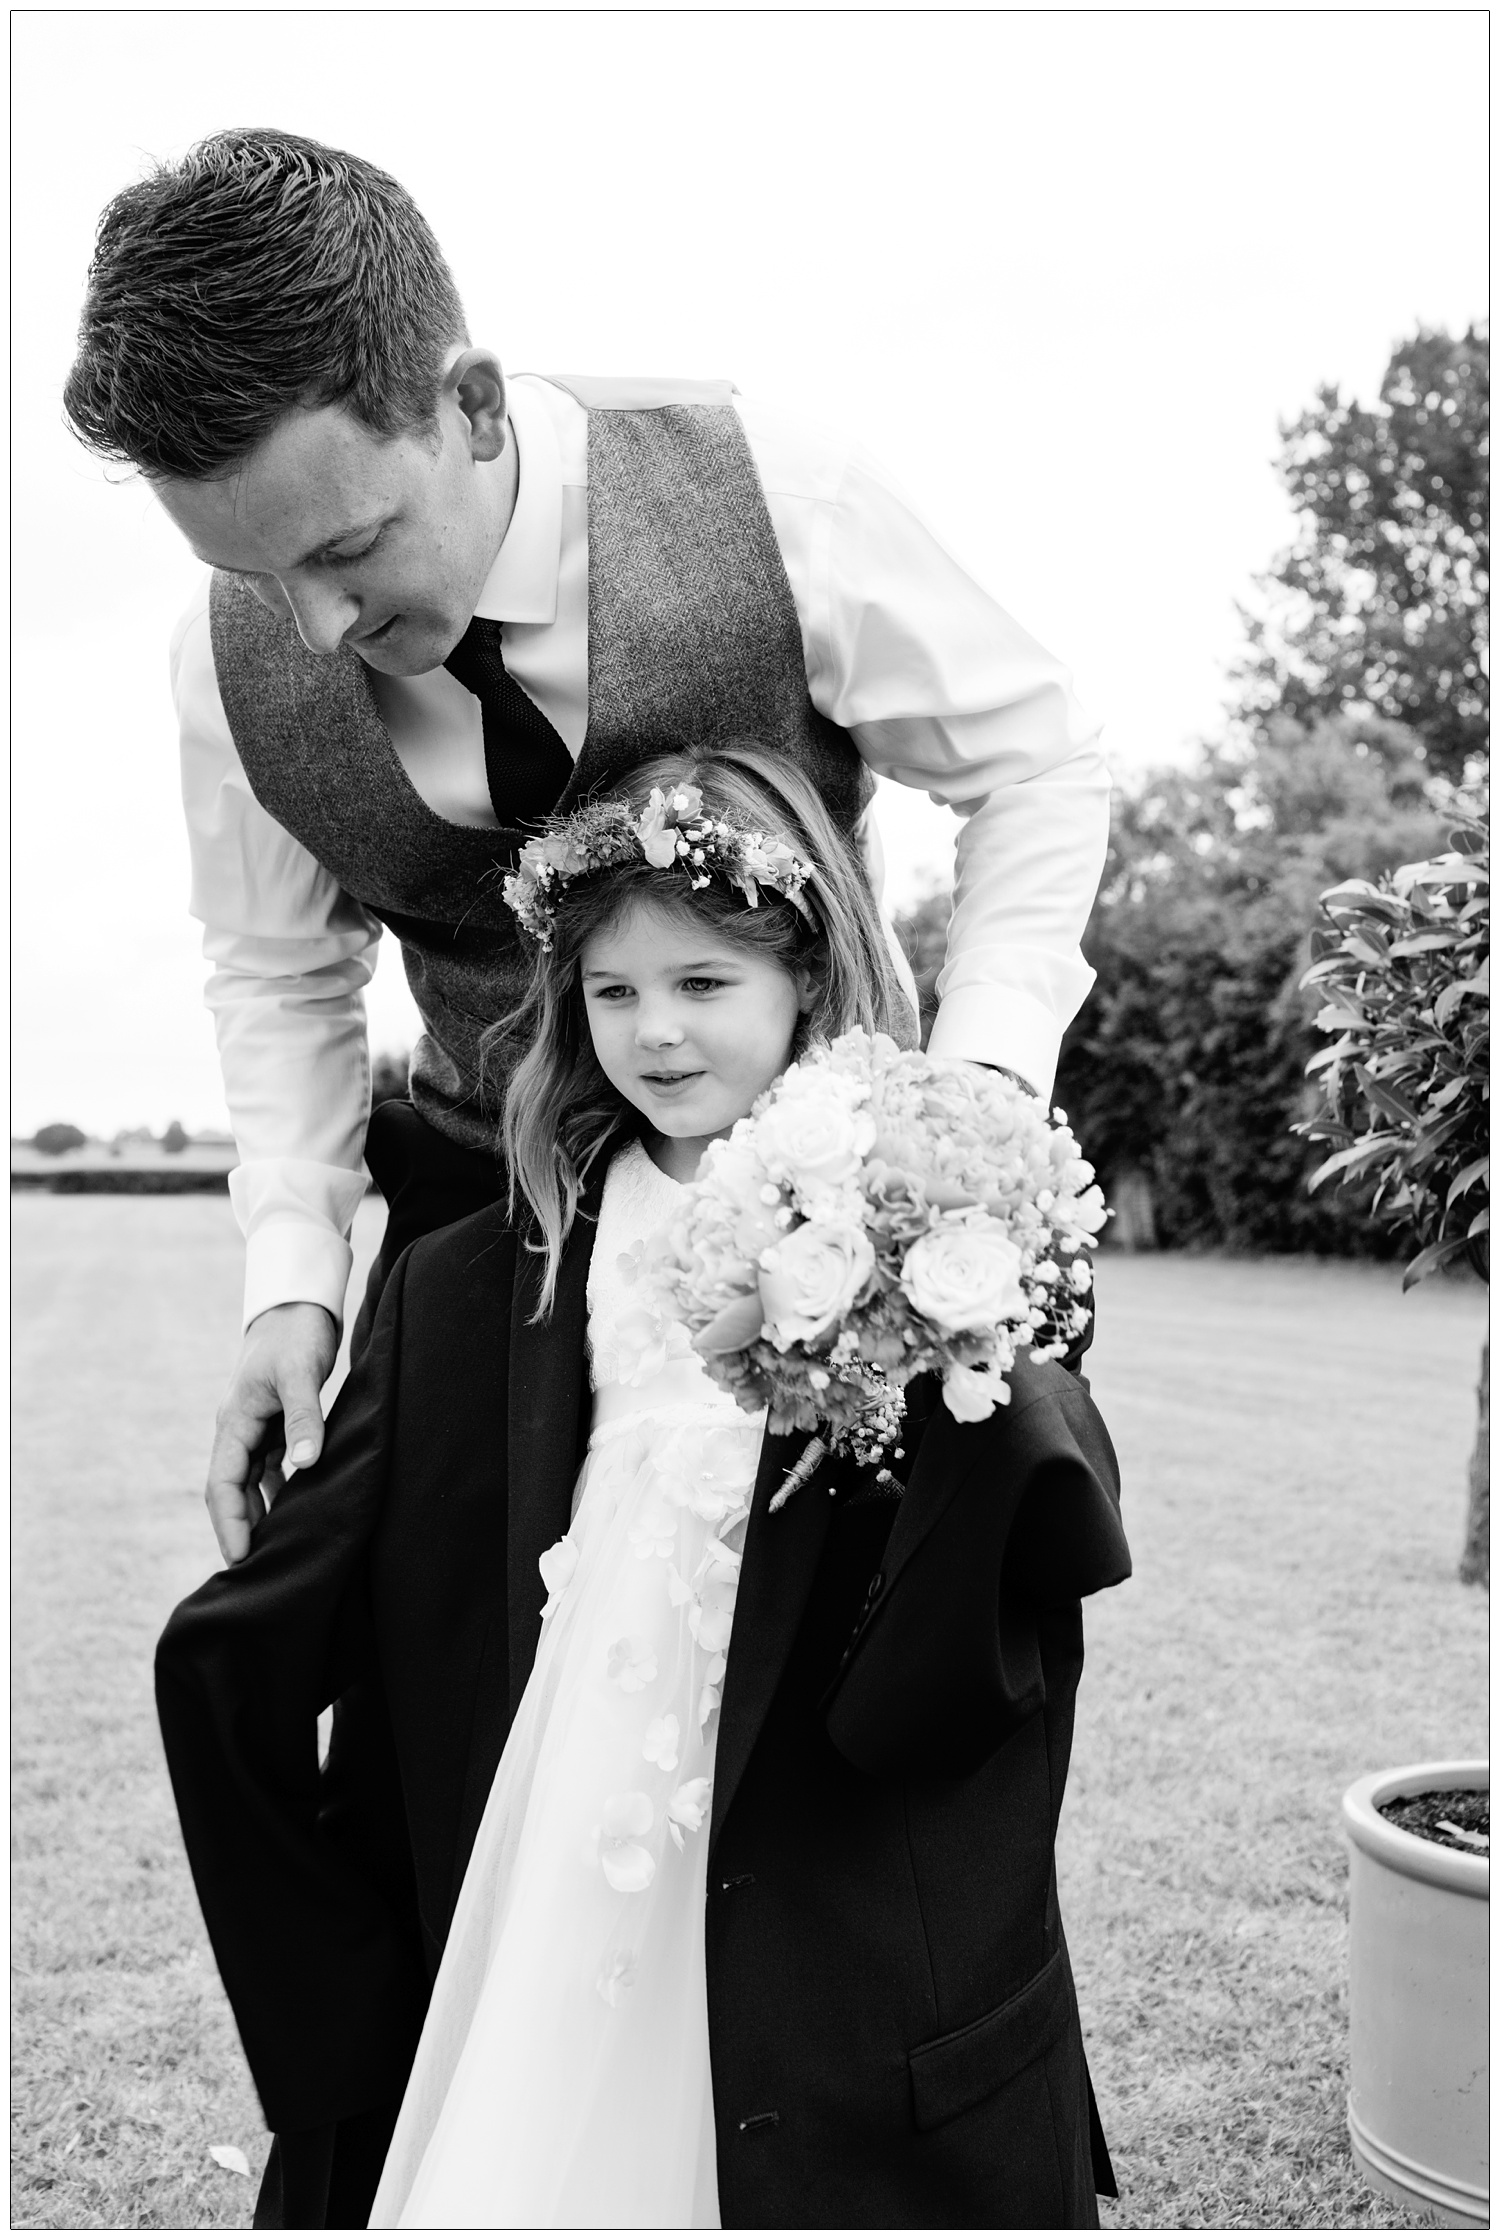 groom putting a man's jacket on a young flowergirl